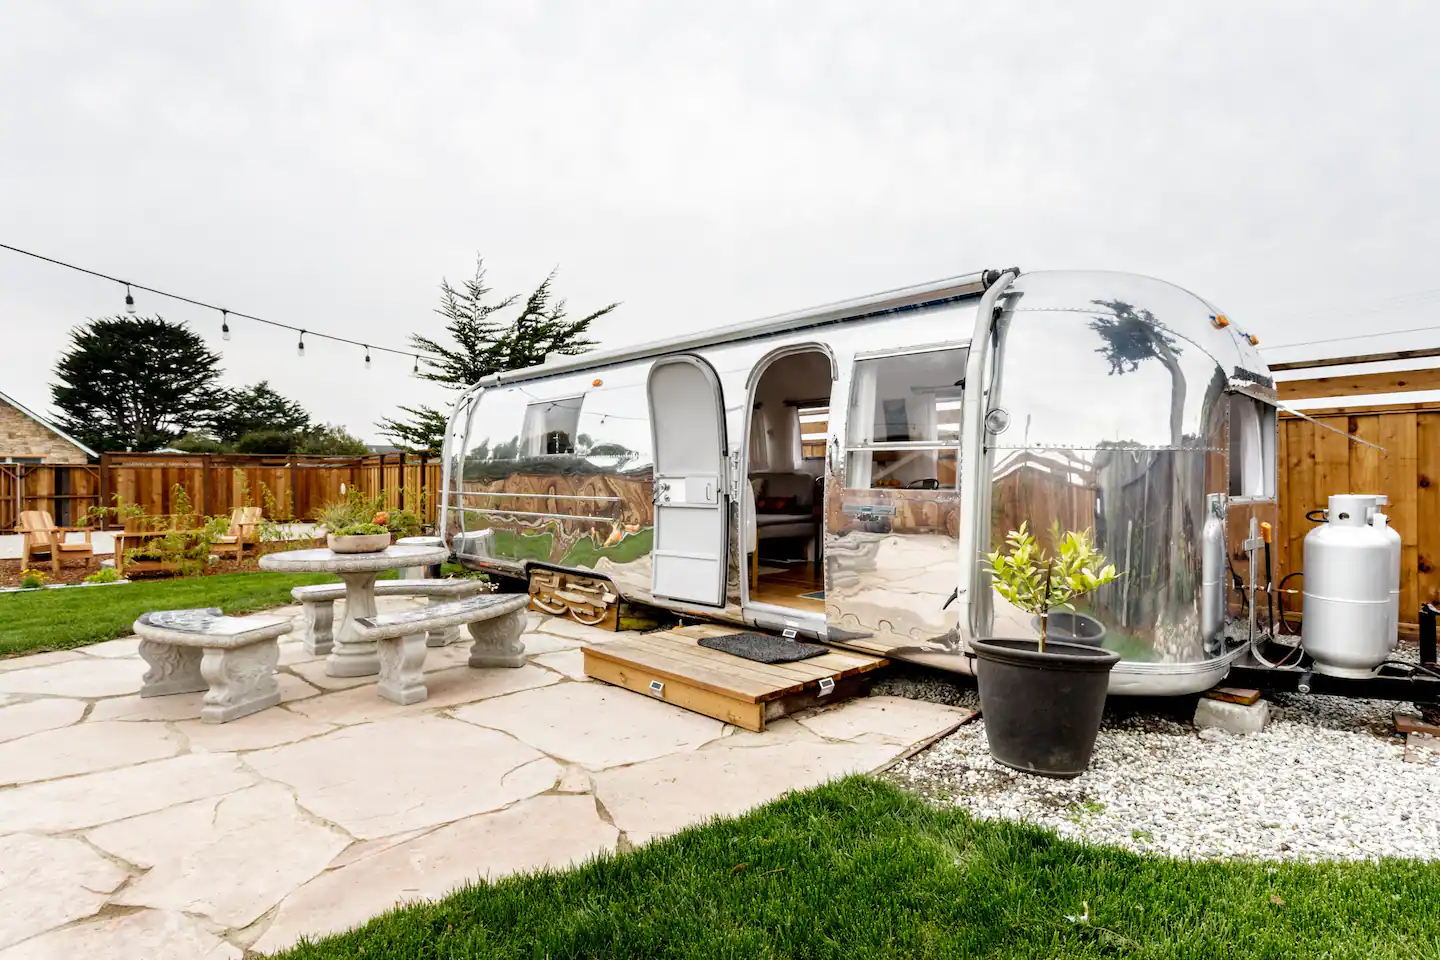 Private Glamping Retreat in a 1967 Airstream on the Coast 